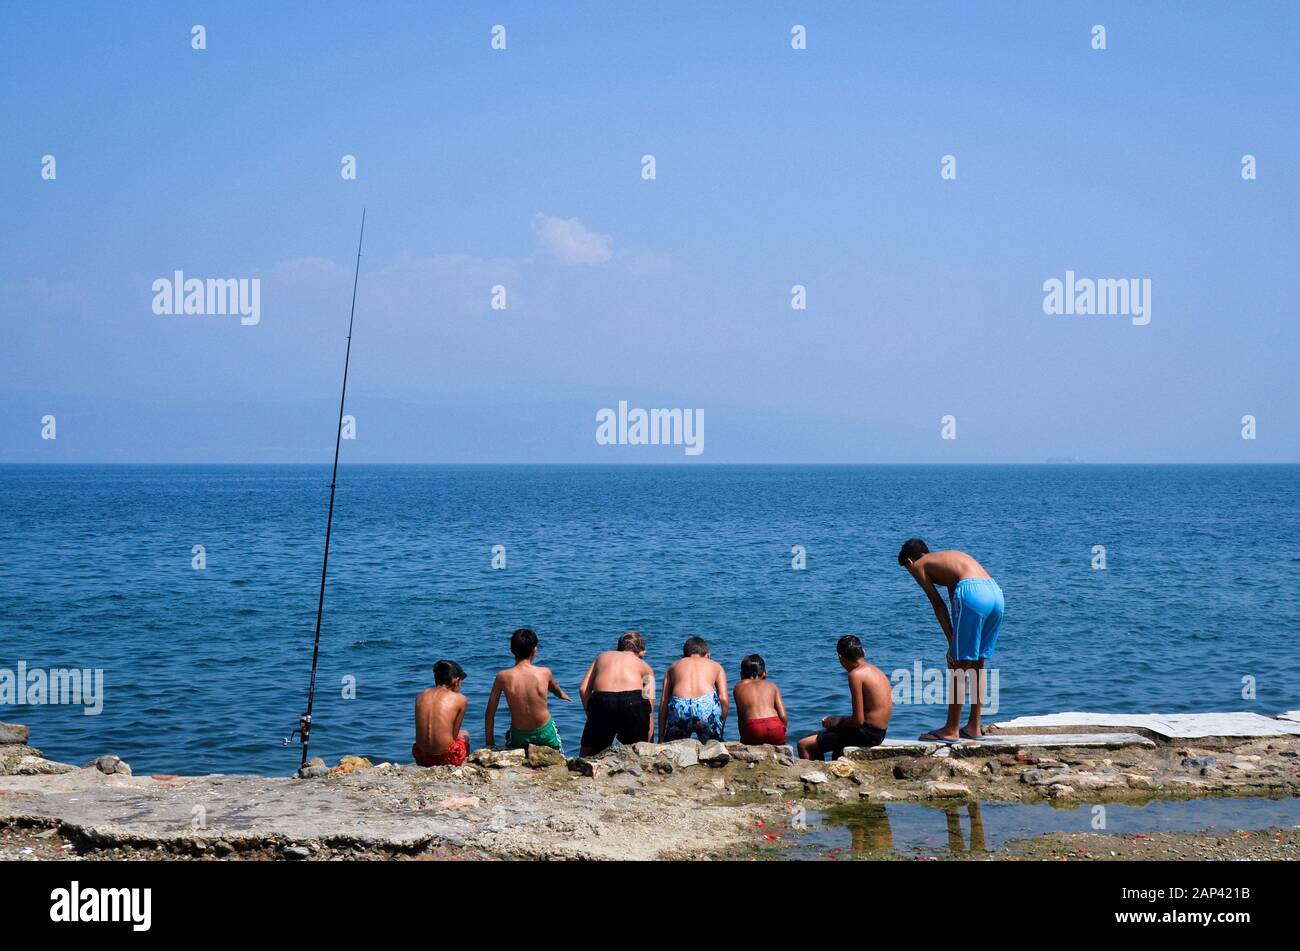 Kids are swimming and fishing on the beach, in Mudanya district of Turkey's Bursa province. Stock Photo